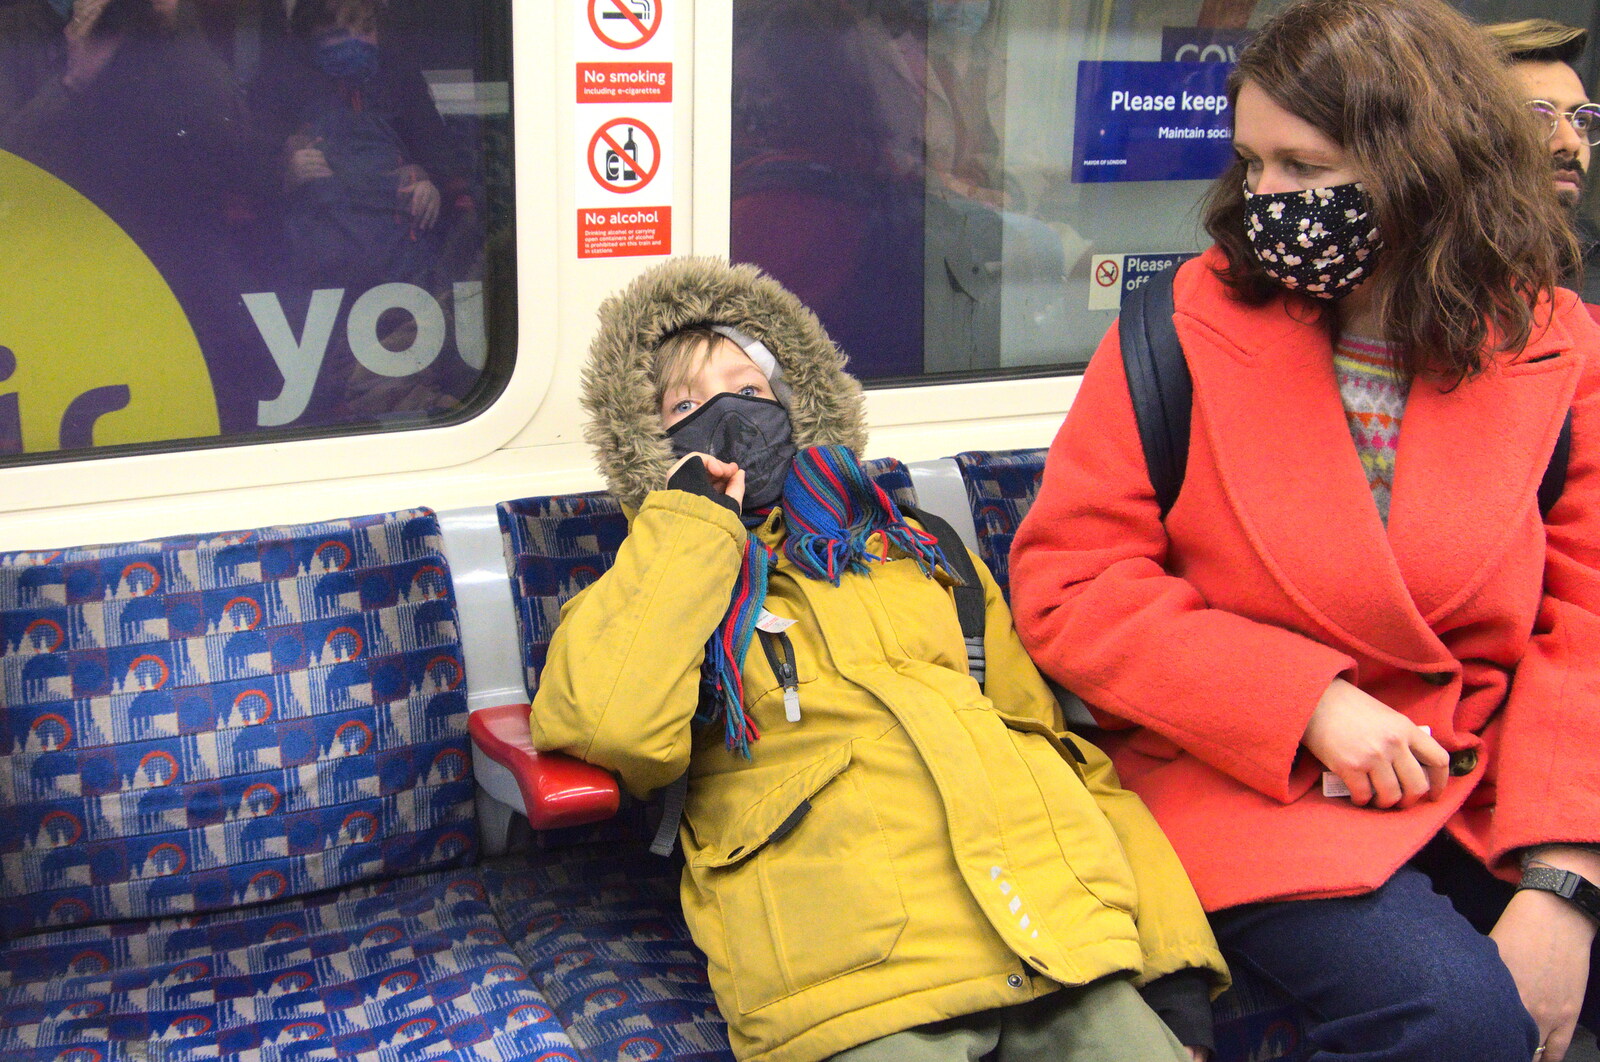 Harry lies back on the tube from A Trip to the Natural History Museum, Kensington, London - 15th January 2022